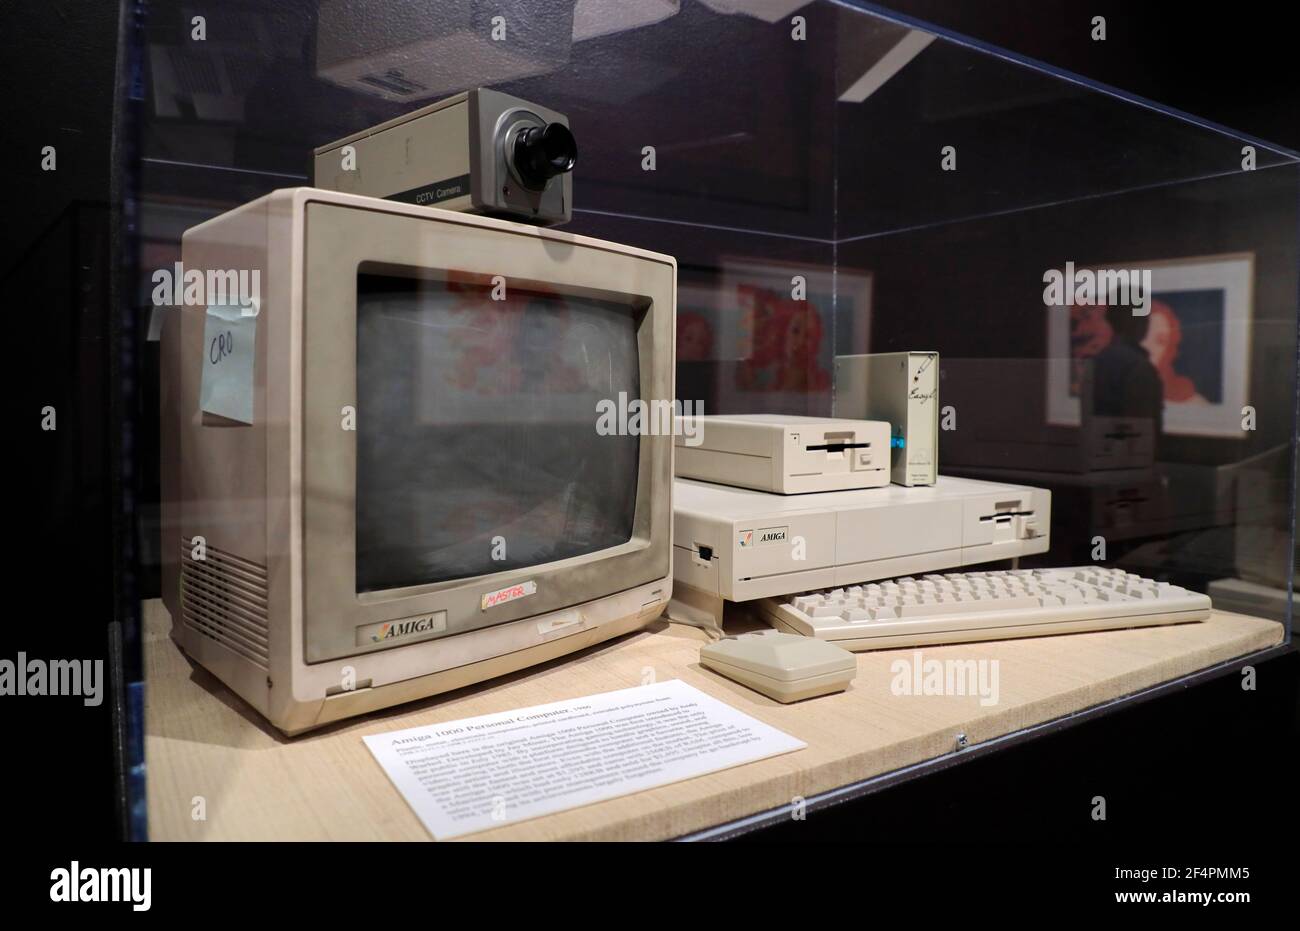 Amiga 1000 personal computer owned by Andy Warhol display in the Andy Warhol Museum.Pittsburgh.Pennsylvania.USA Stock Photo